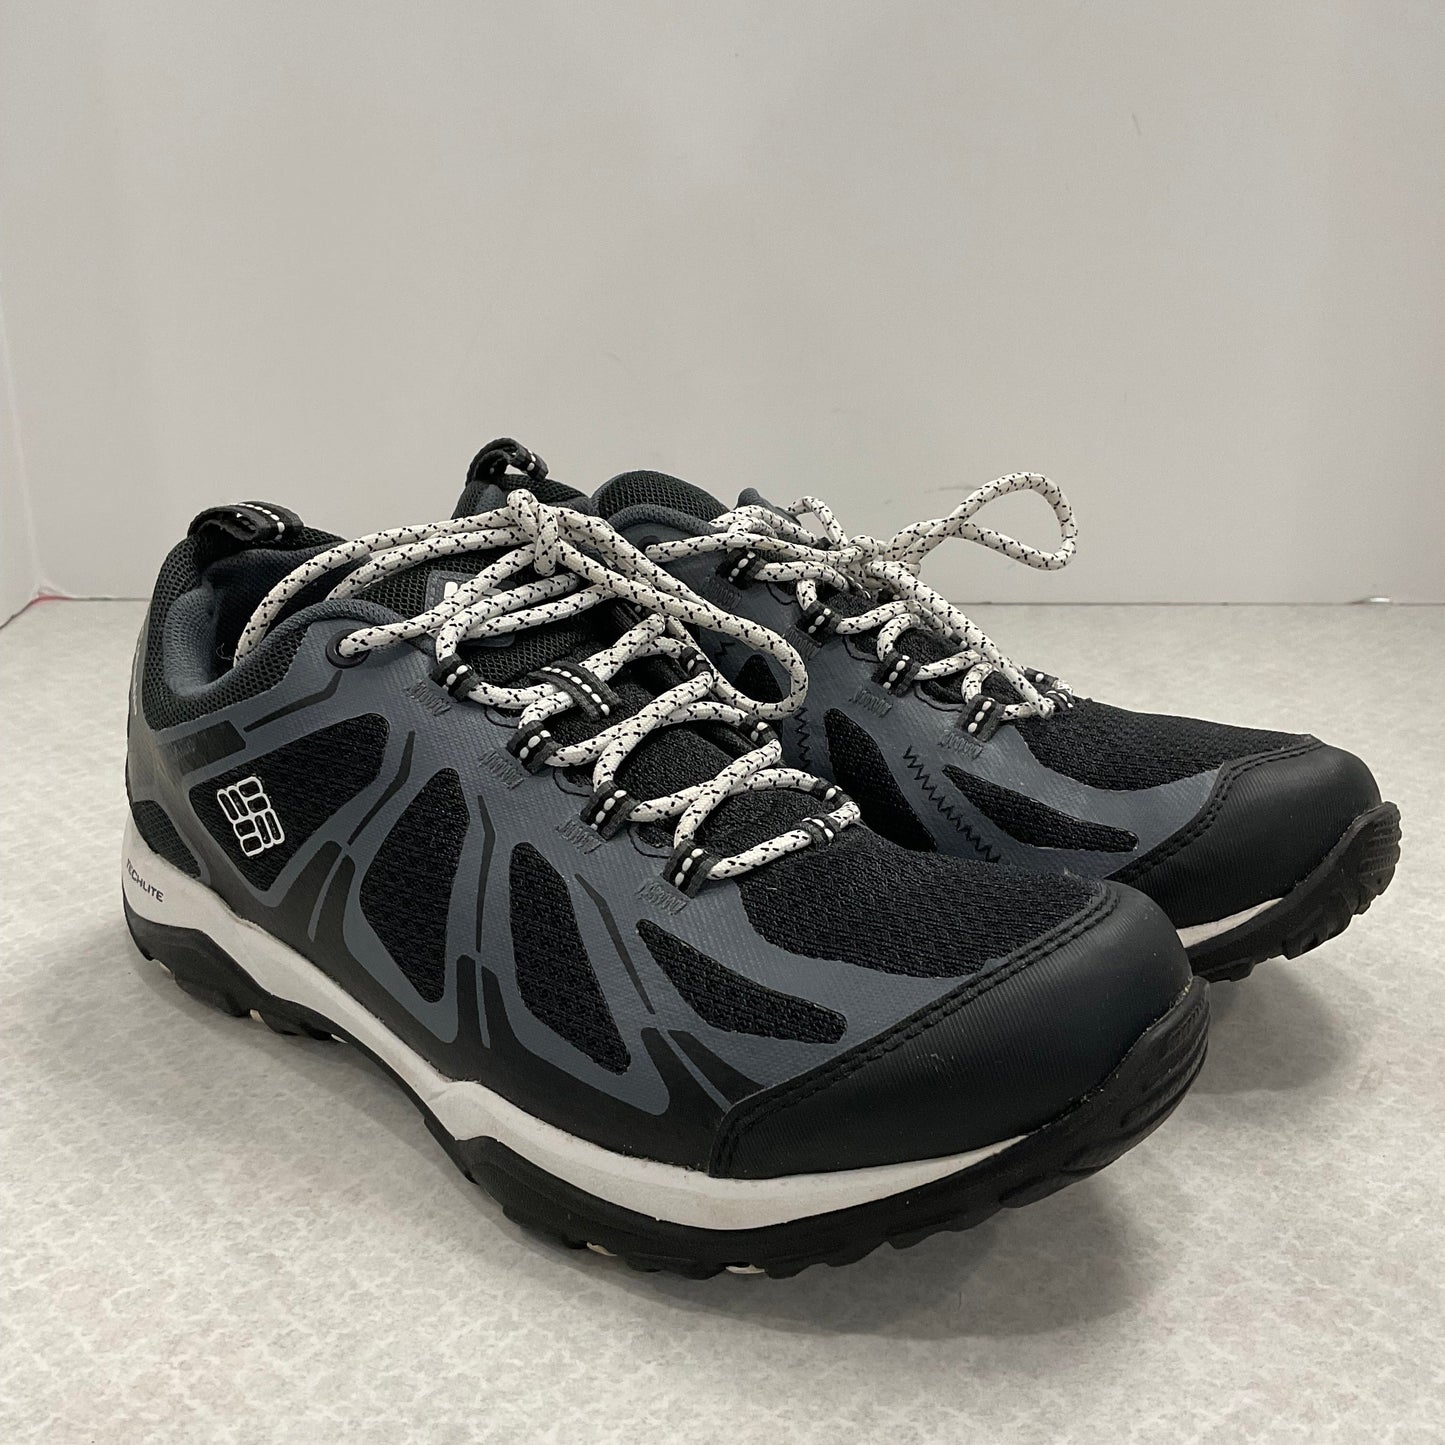 Black & Grey Shoes Athletic Columbia, Size 8